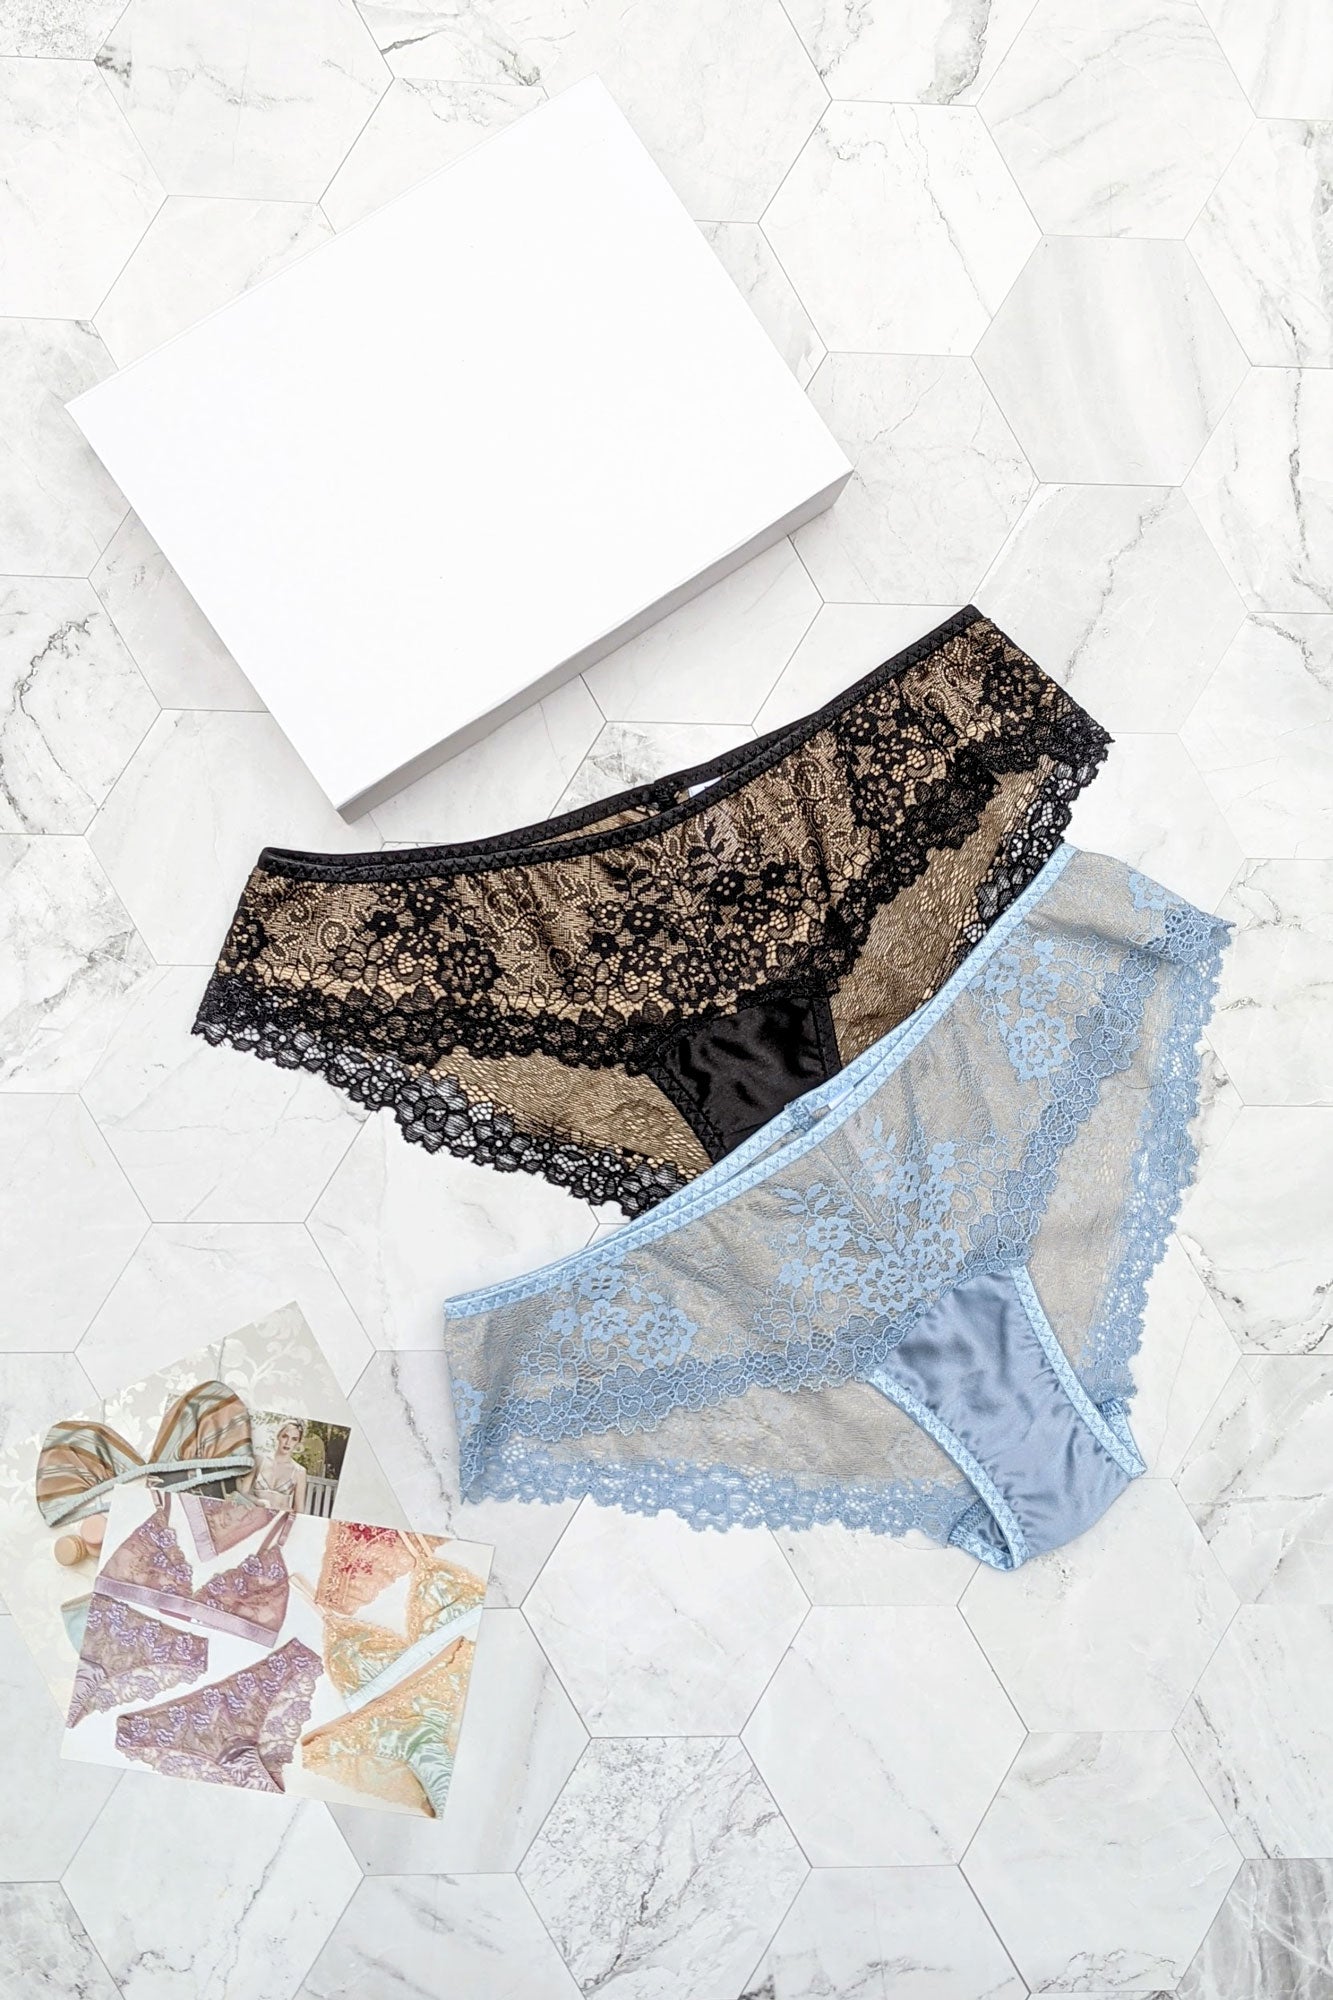 Black lace knickers  Luxury lingerie and boxed gift sets